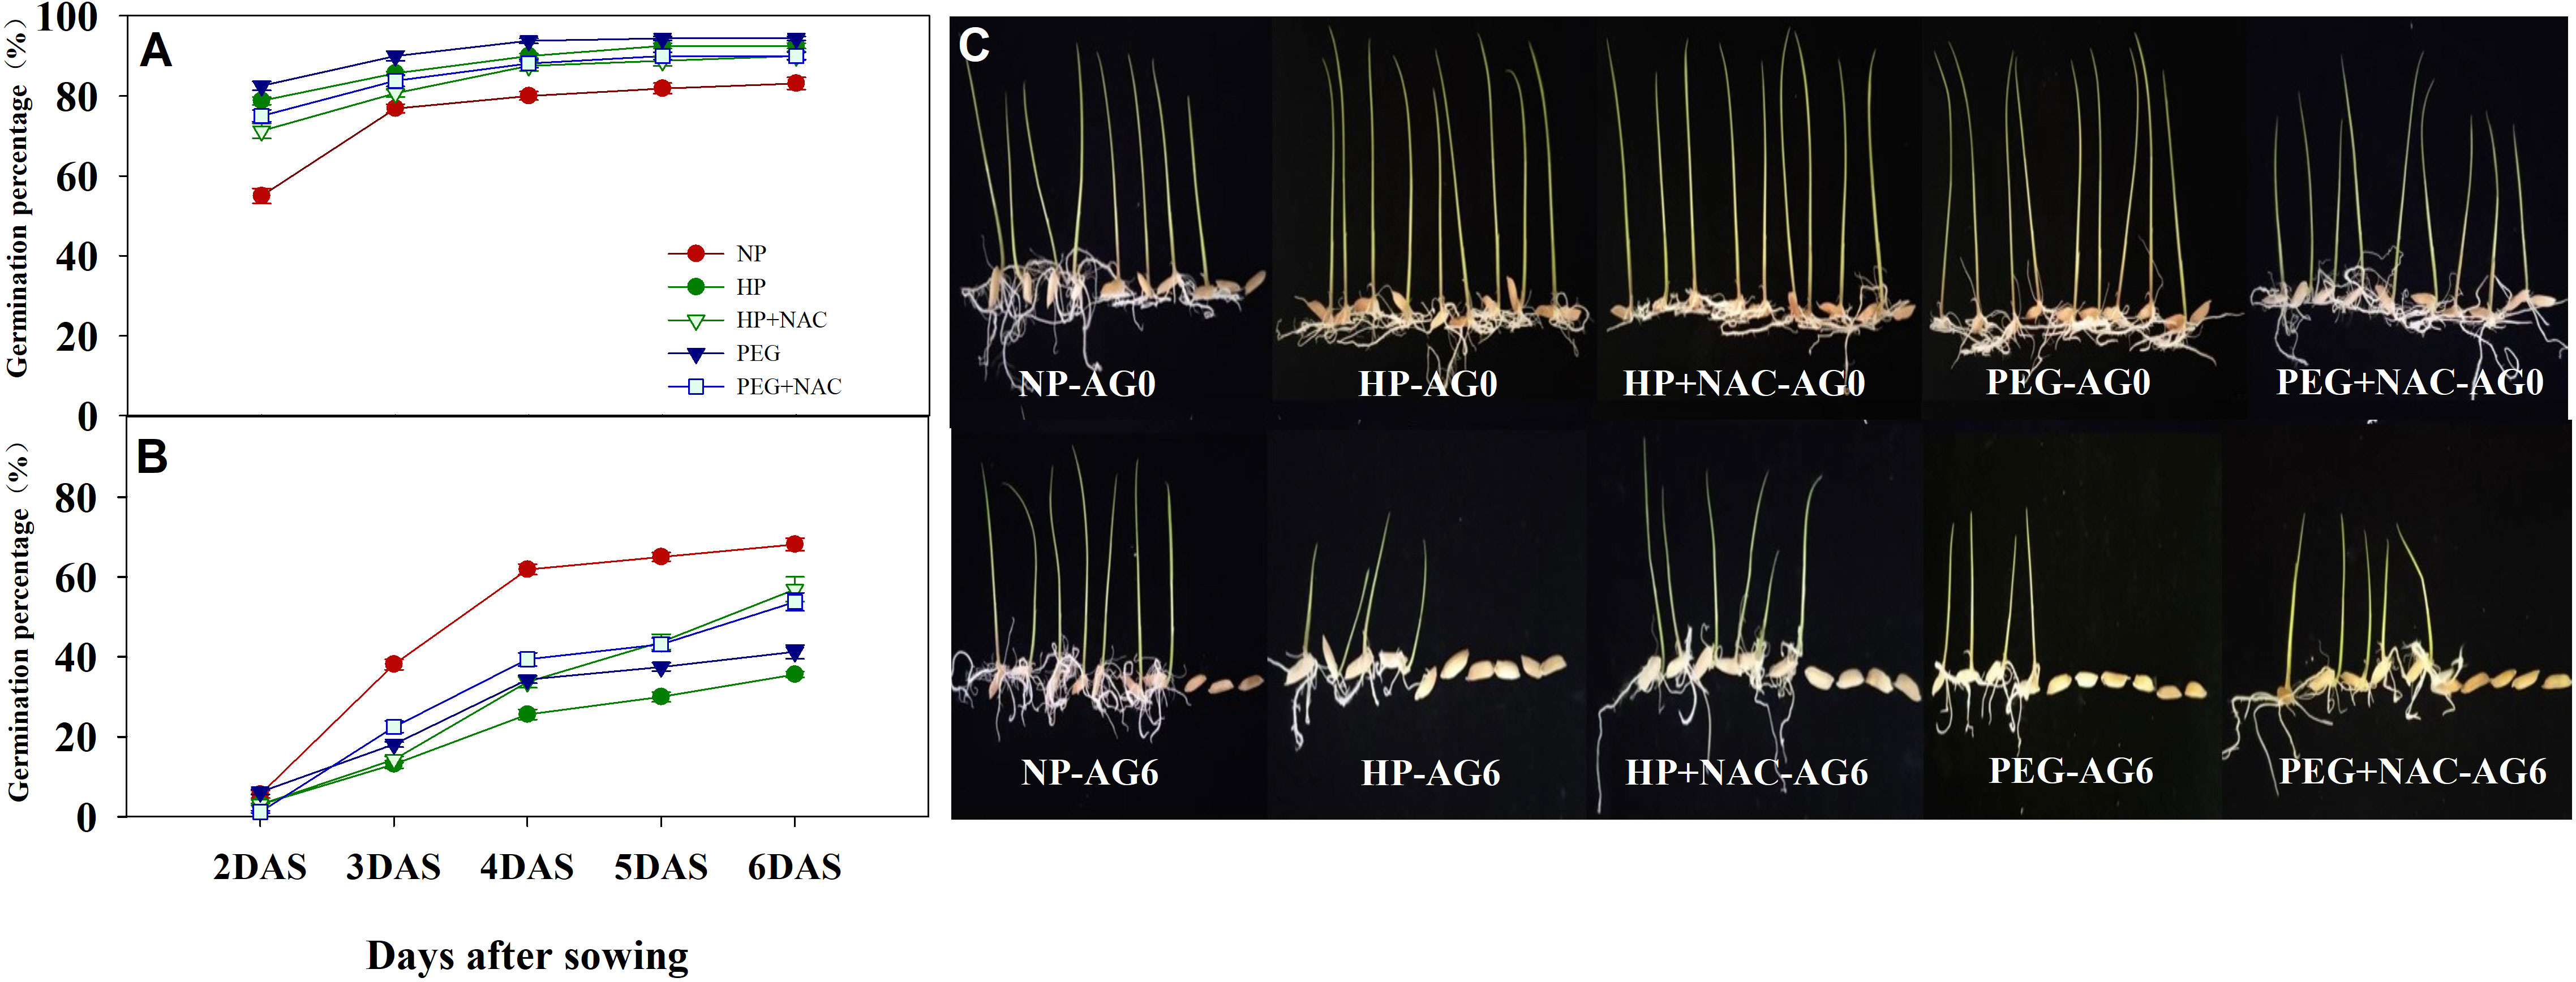 High-temperature drying increases longevity of rice seed